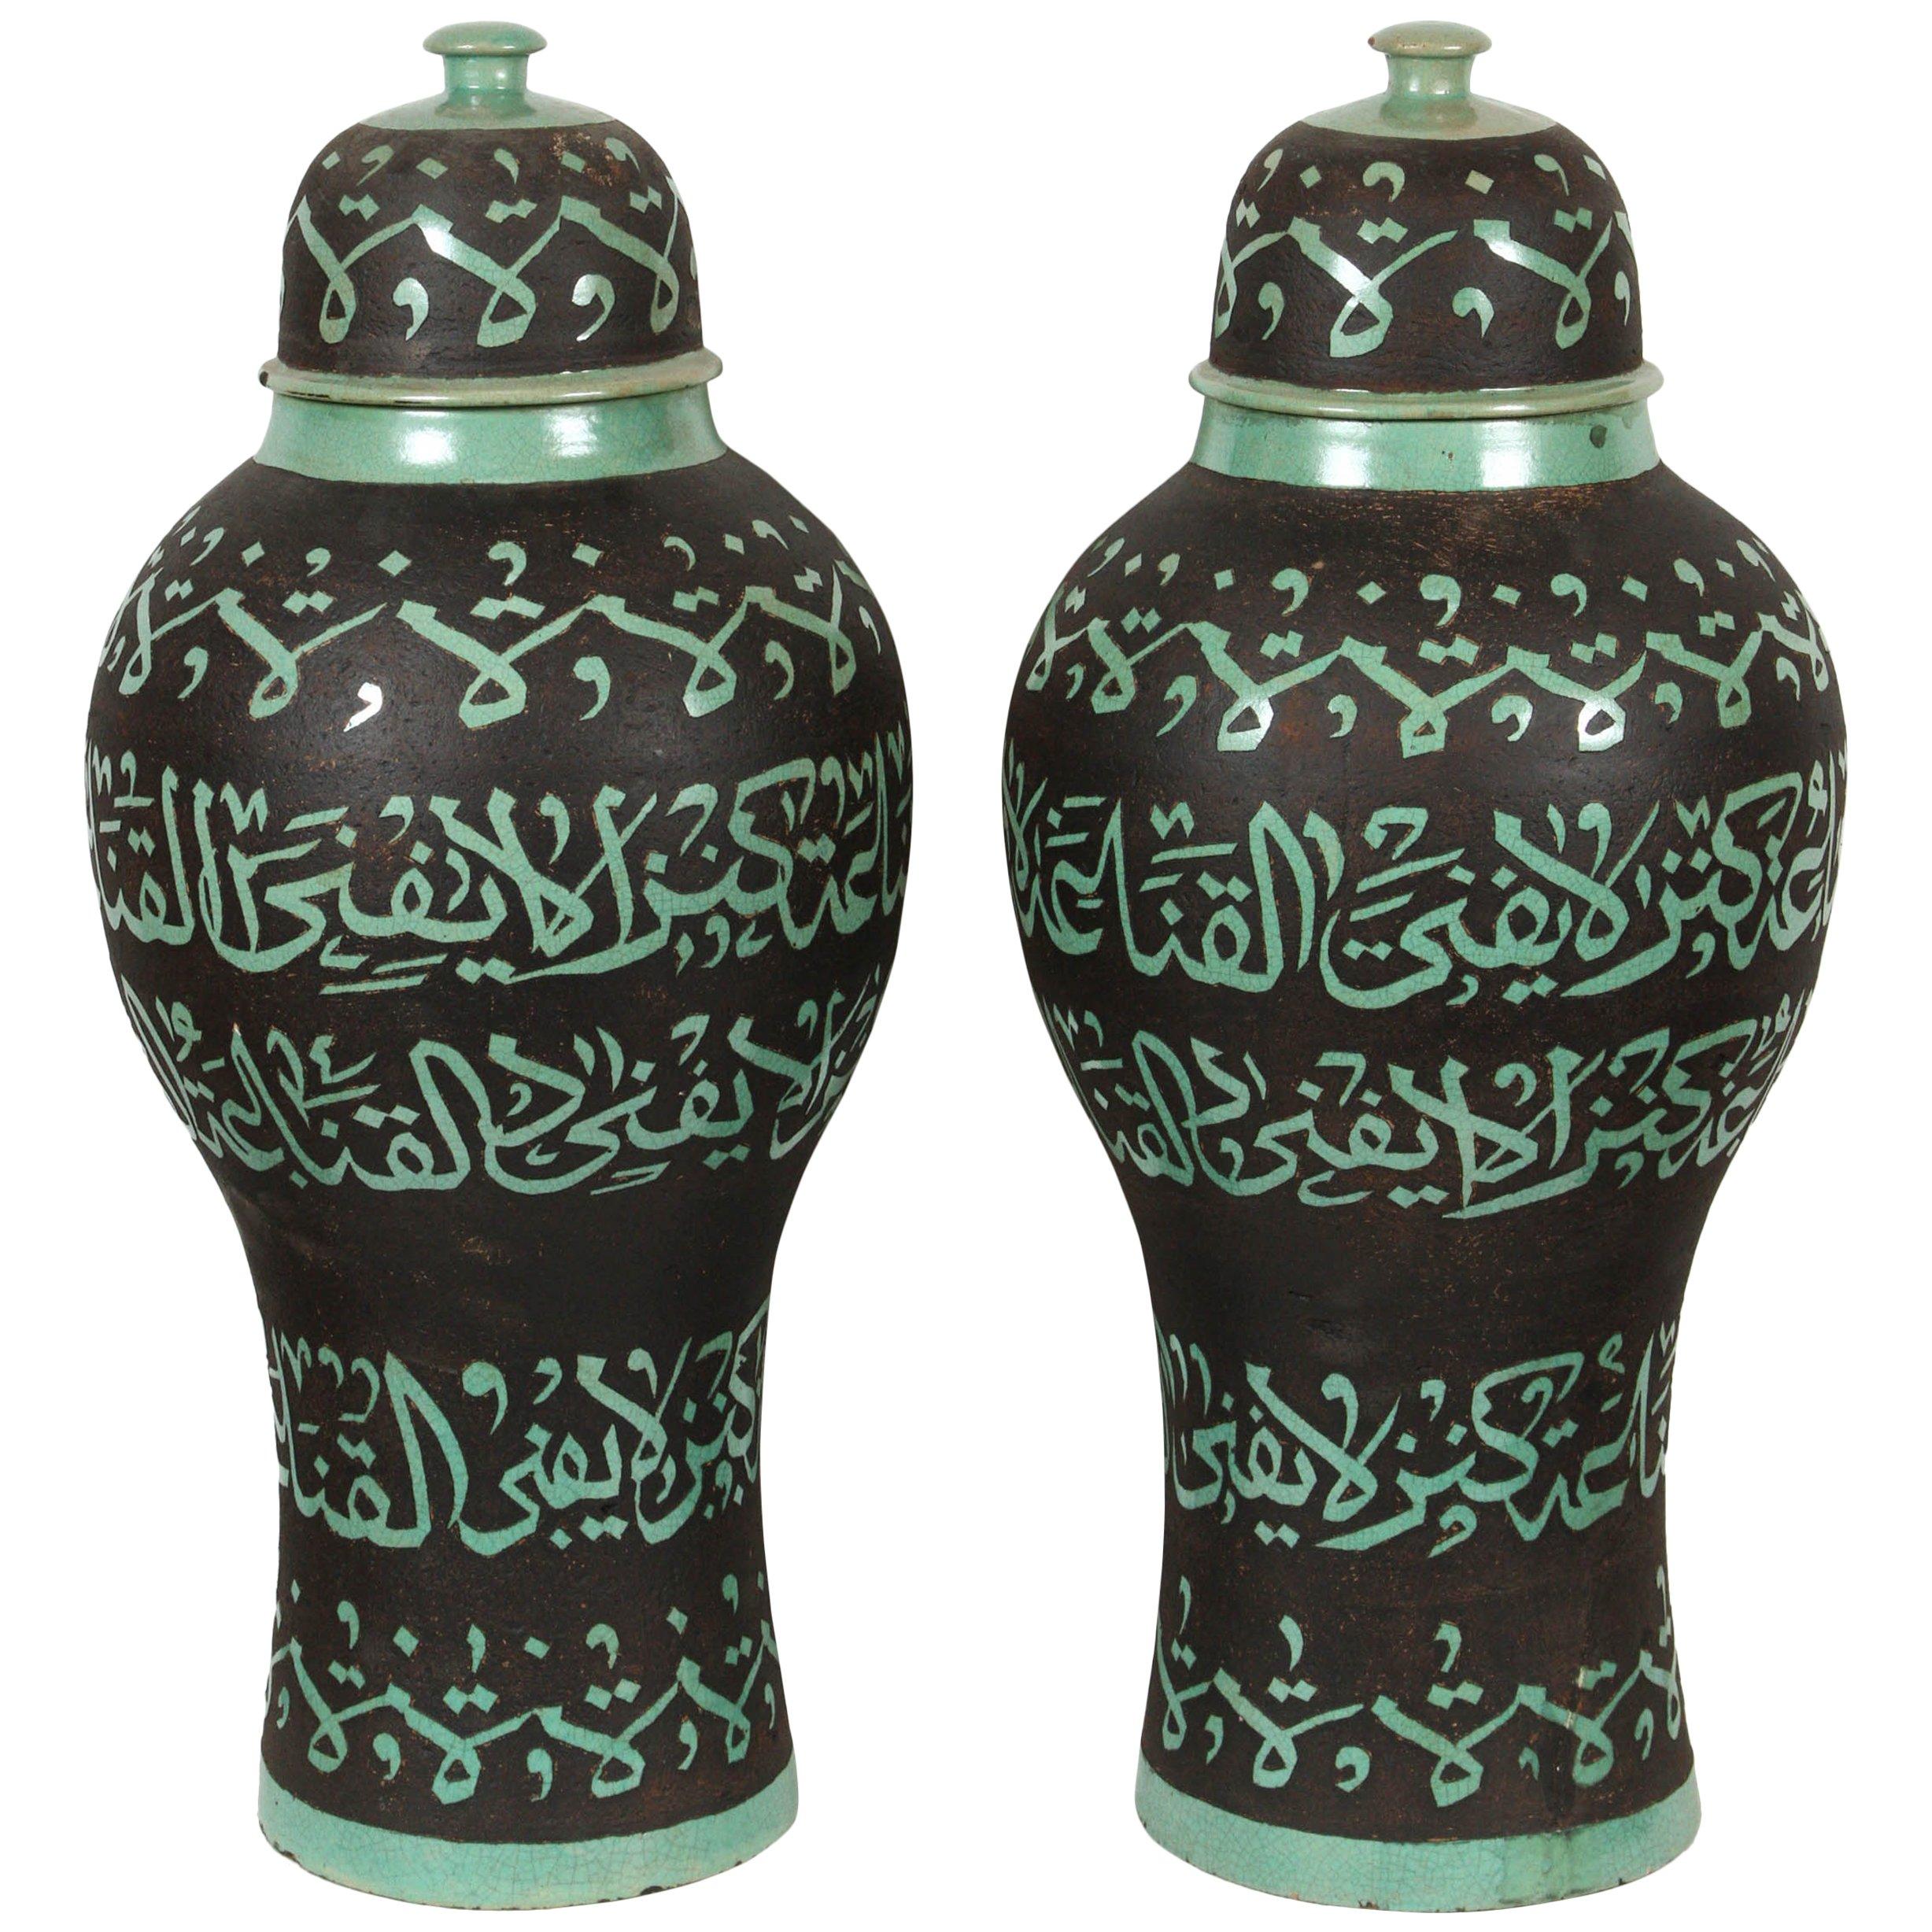 Moroccan Green Ceramic Urns with Arabic Calligraphy Lettrism Art Writing For Sale